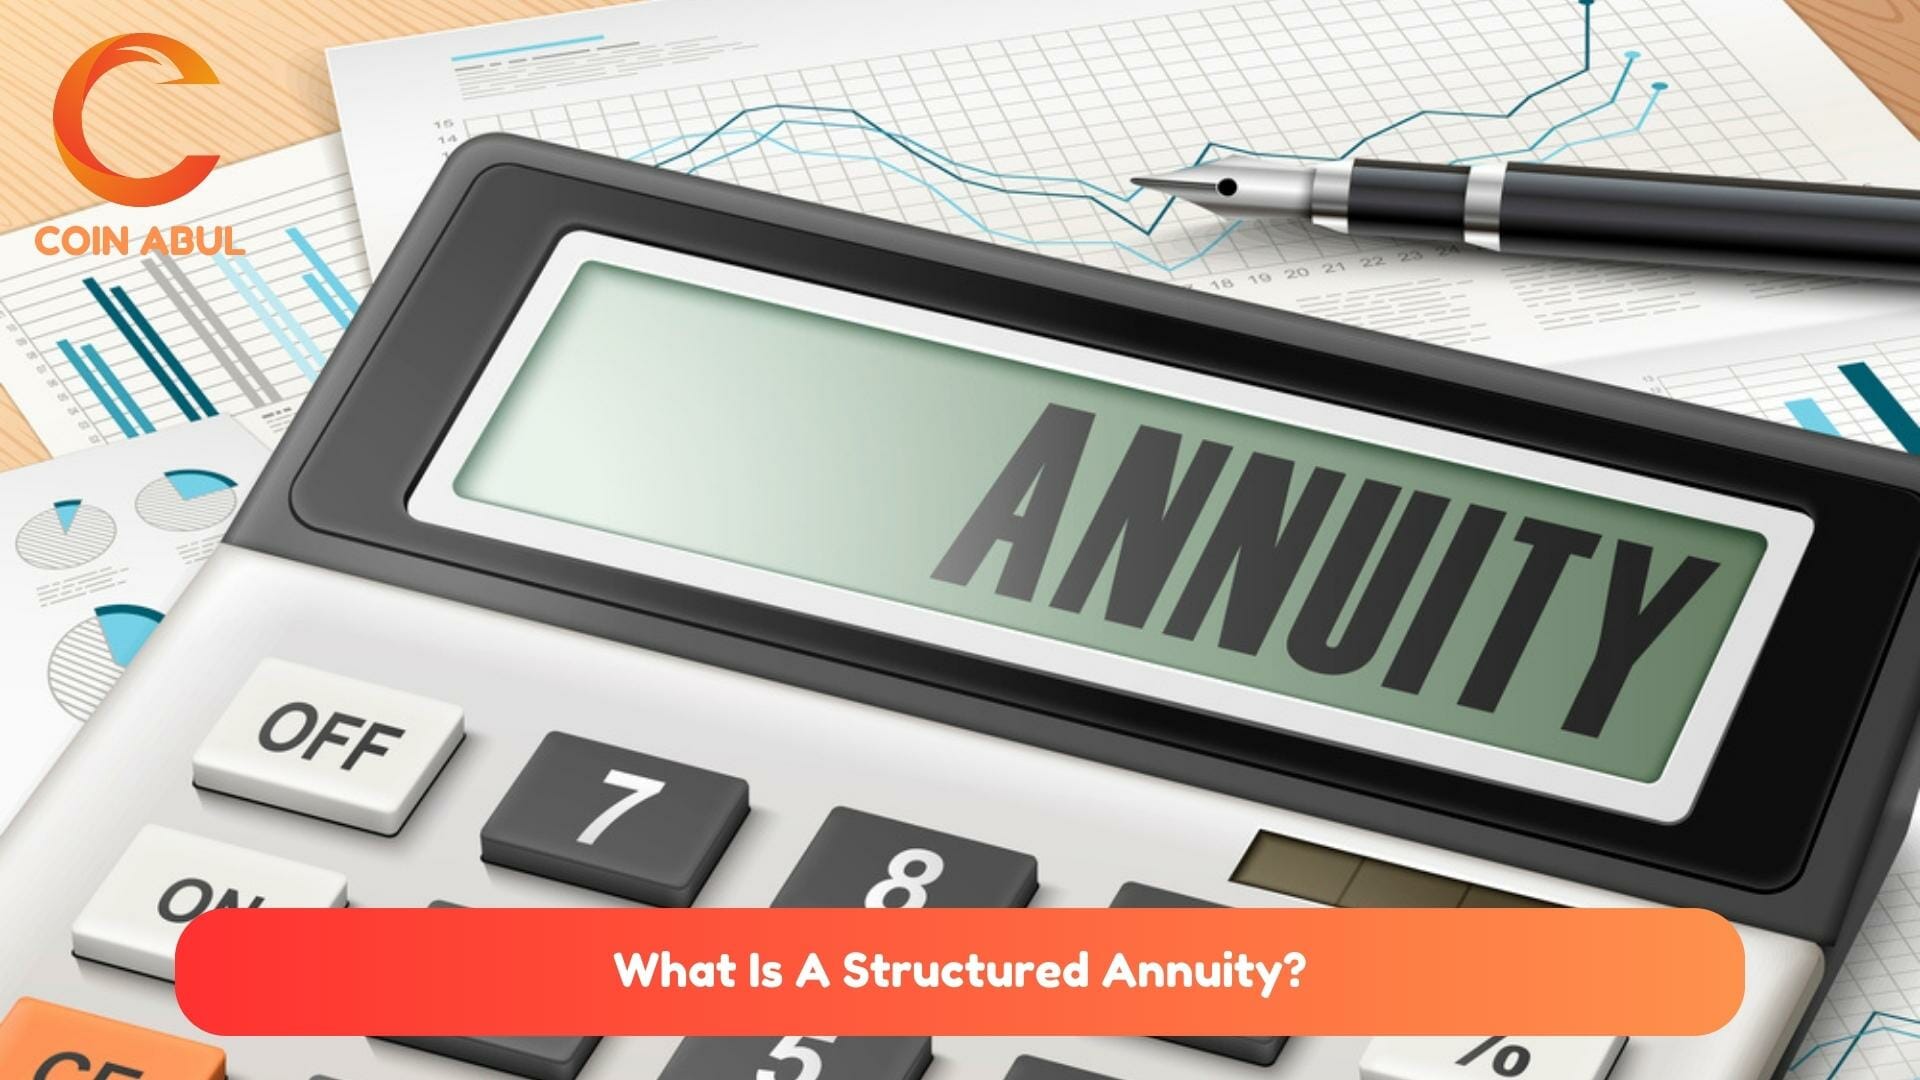 What Is A Structured Annuity